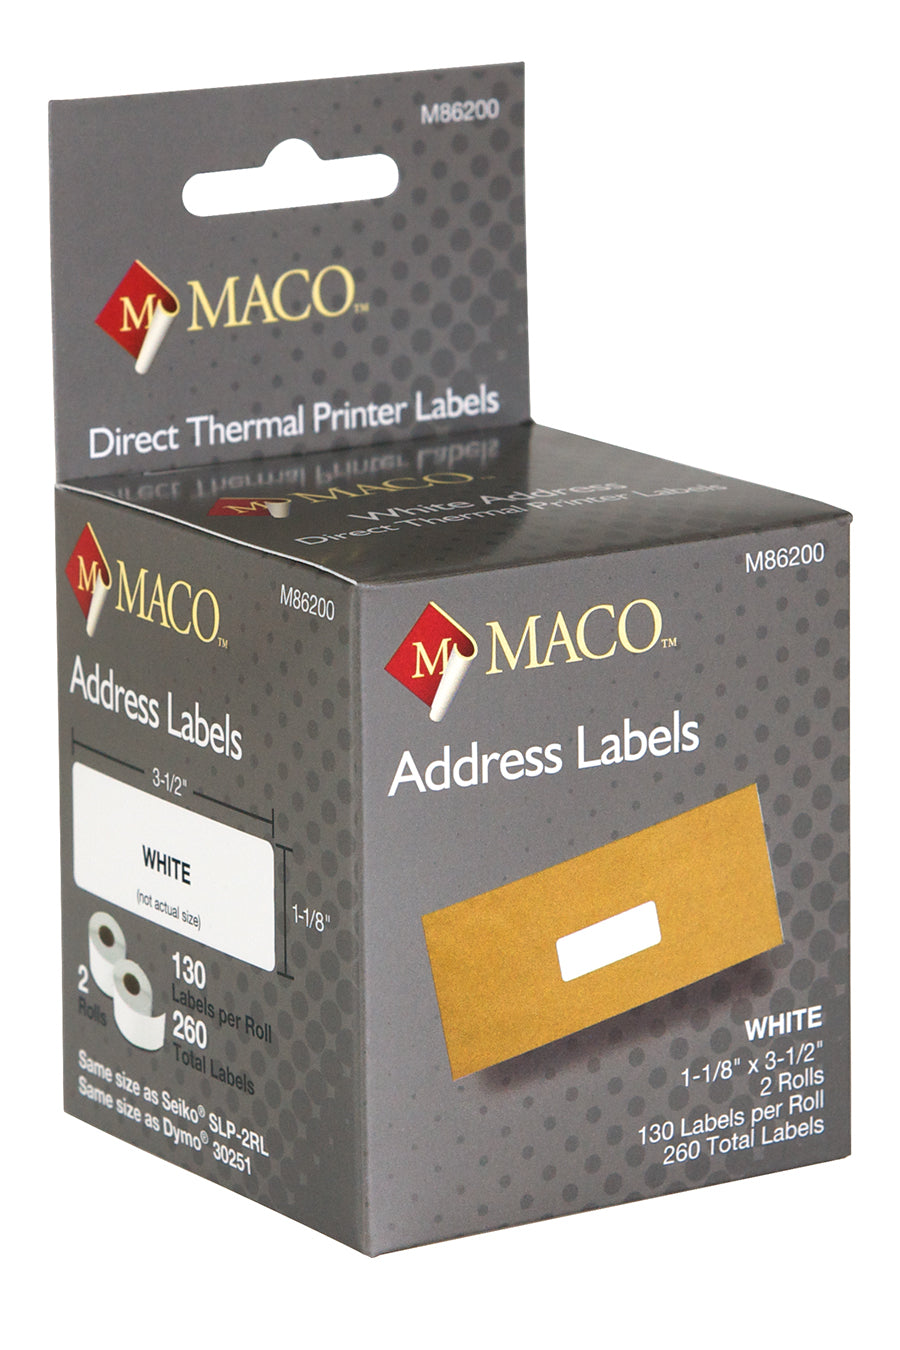 Direct Thermal White Address Labels, 1-1/8" x 3-1/2", 130/Roll, 260 Labels/Bx